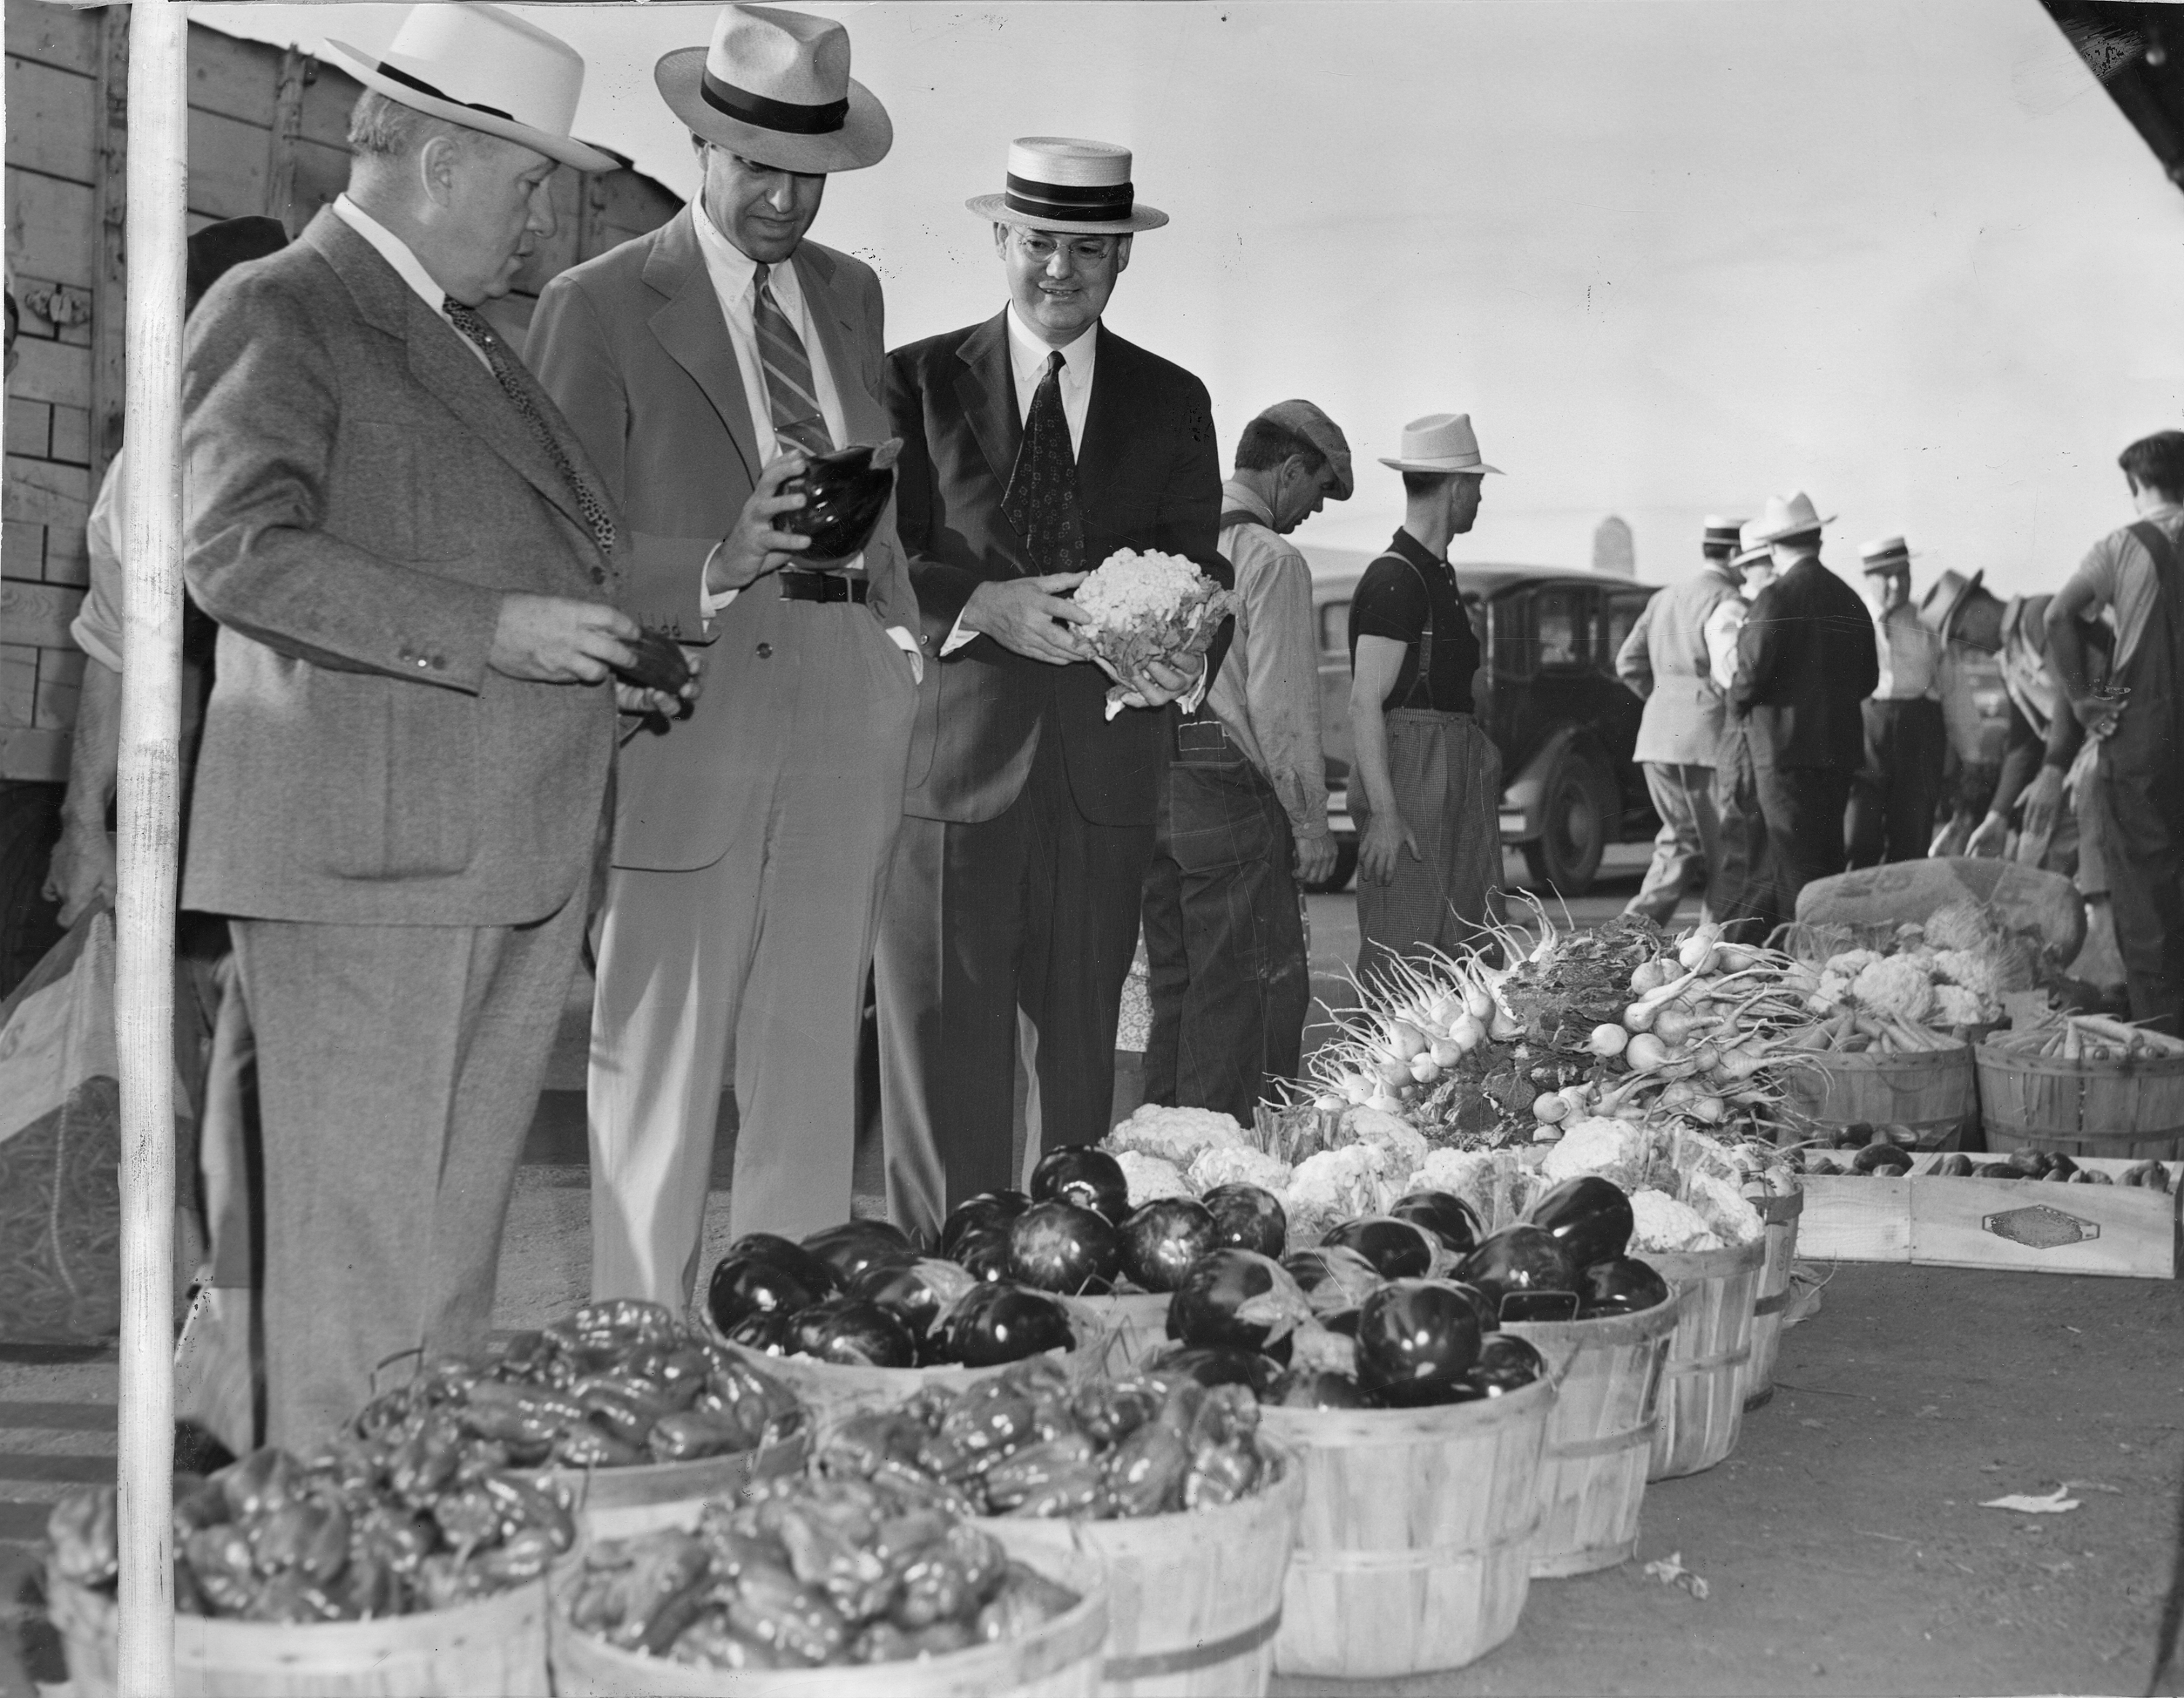 men at market with baskets of produce